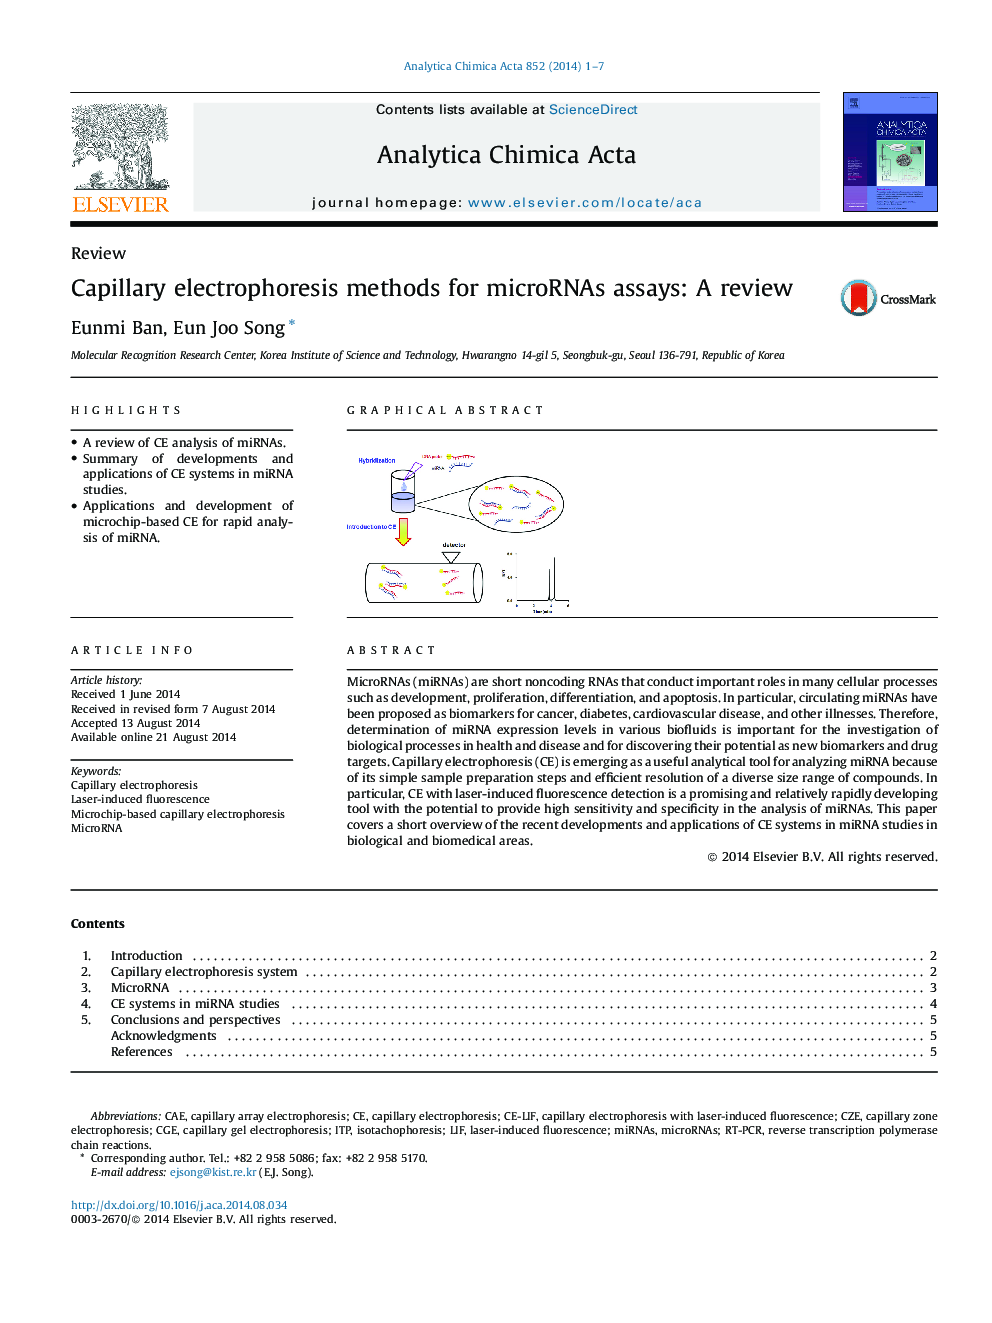 Capillary electrophoresis methods for microRNAs assays: A review